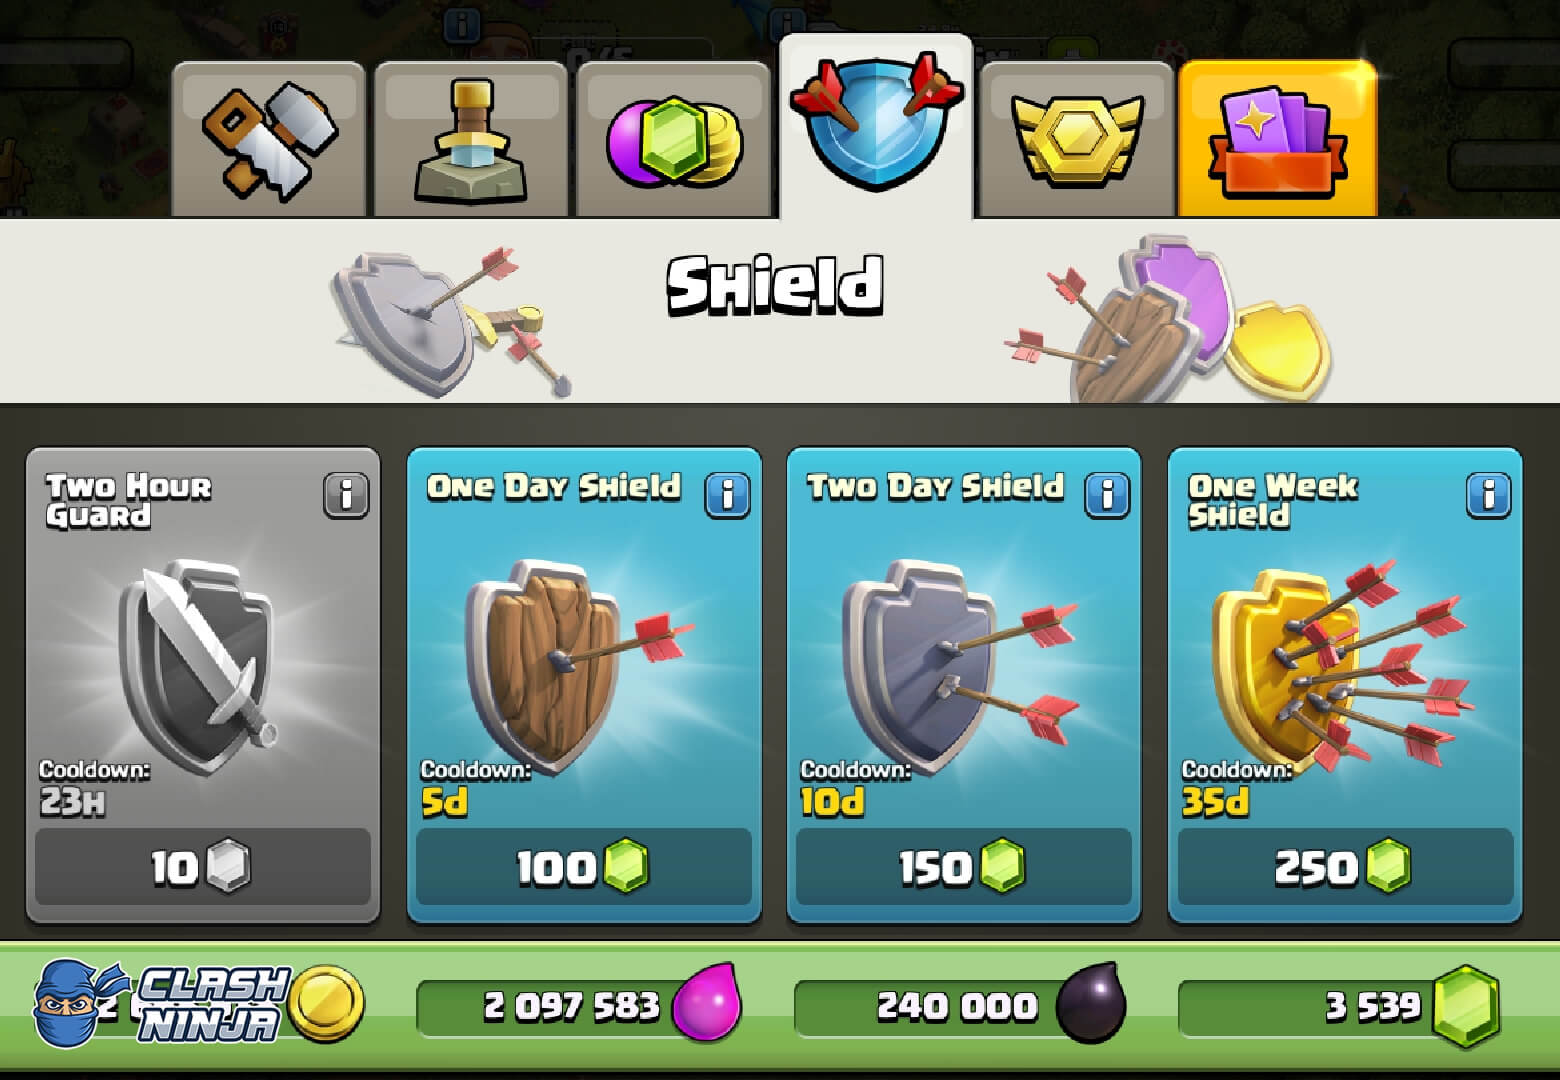 Guard and Shield in the shop